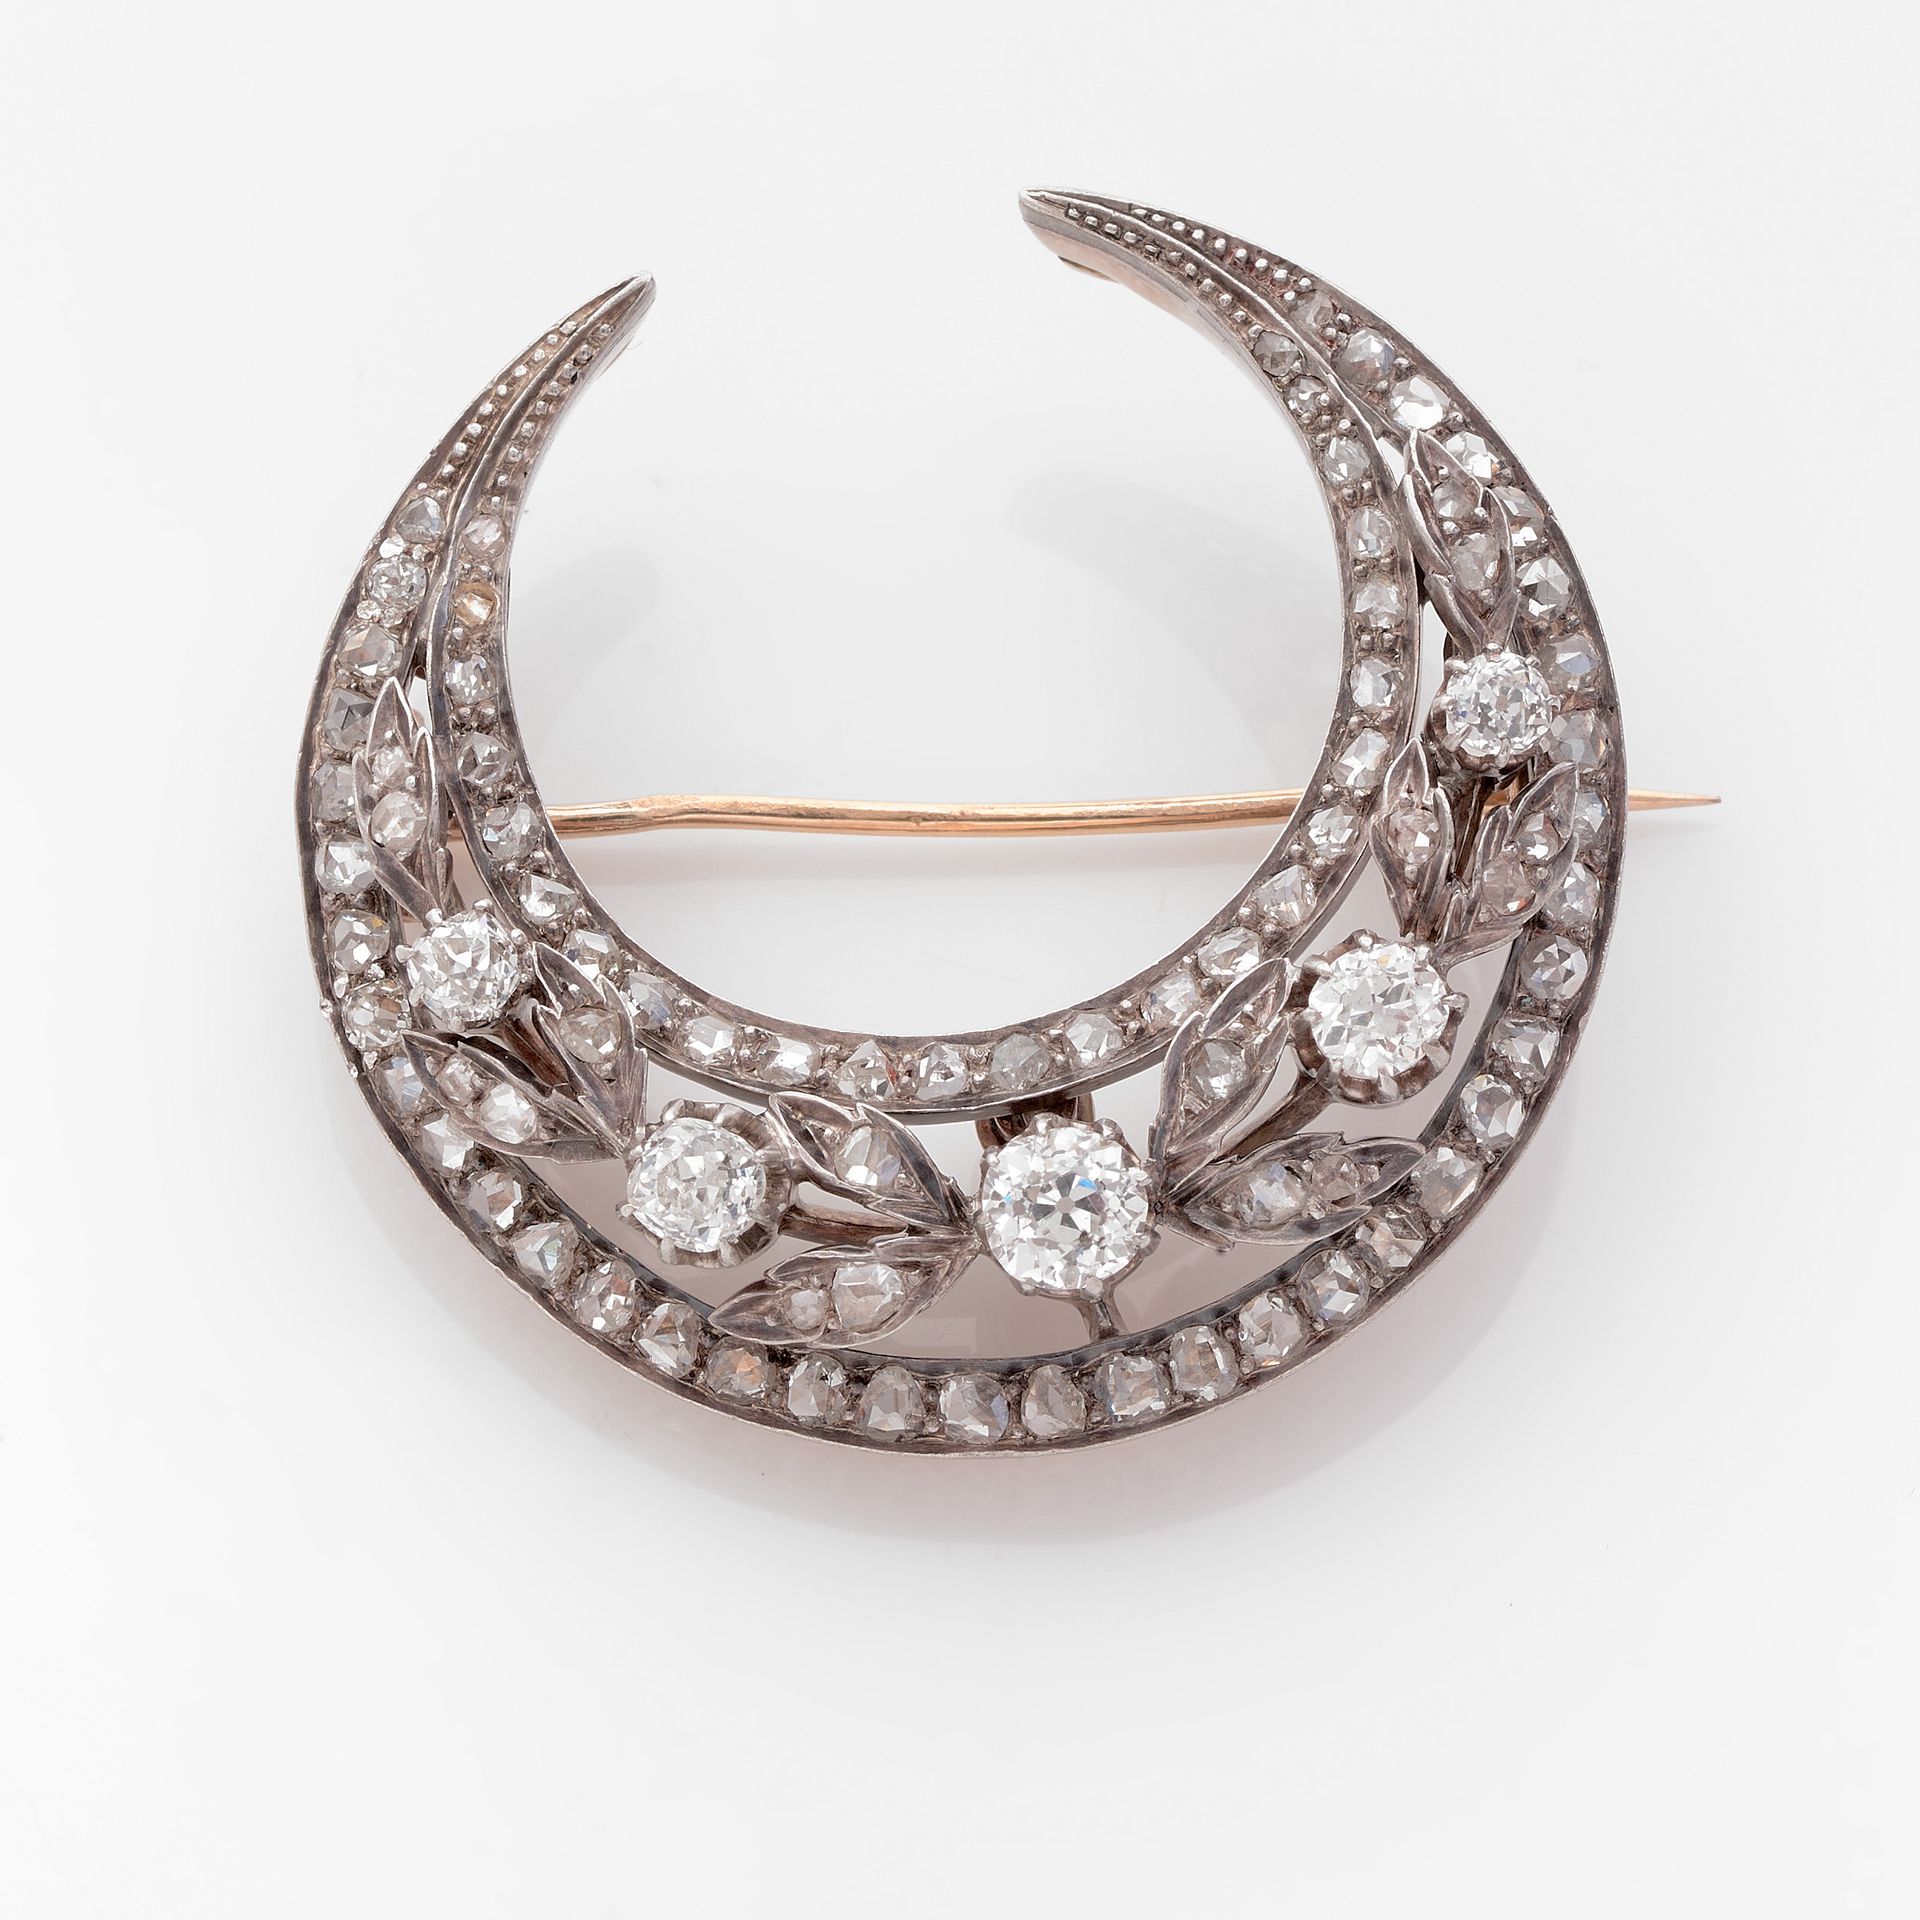 Null CRESCENT MOON BROOCH

in yellow gold and silver, set with rose-cut diamonds&hellip;